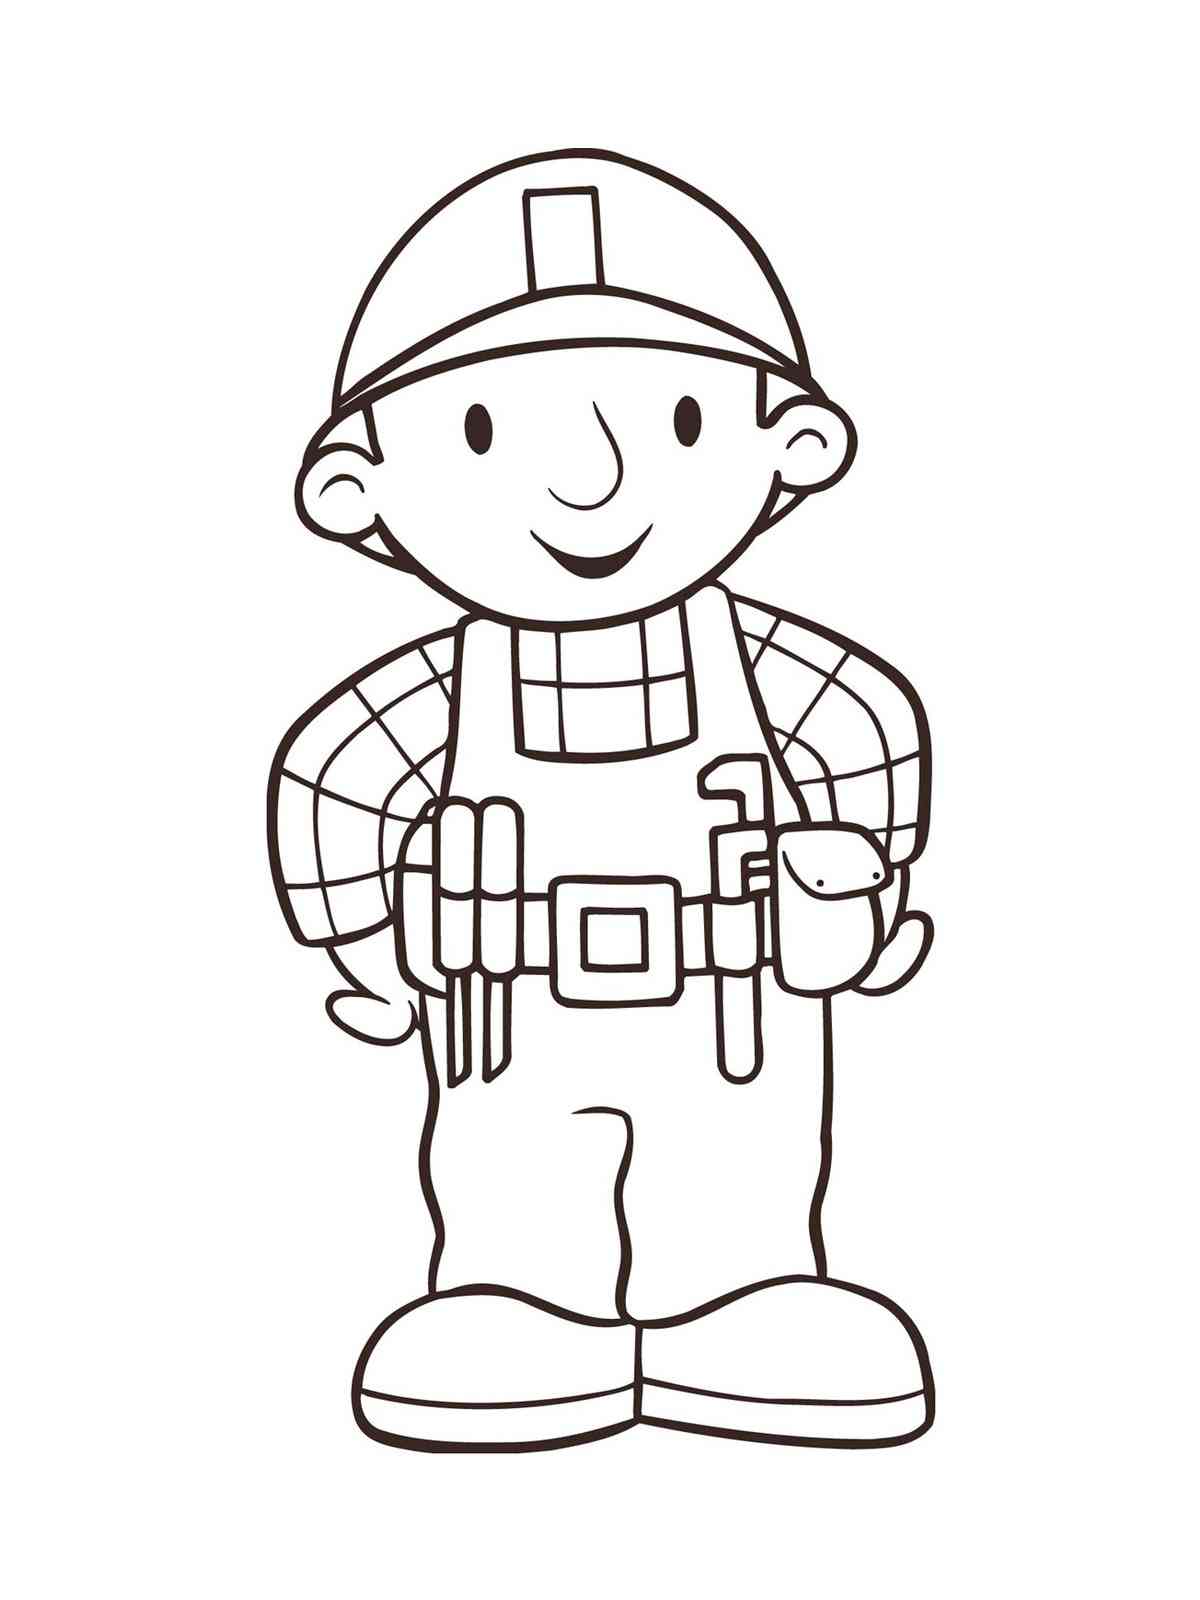 Bob The Builder 47 coloring page